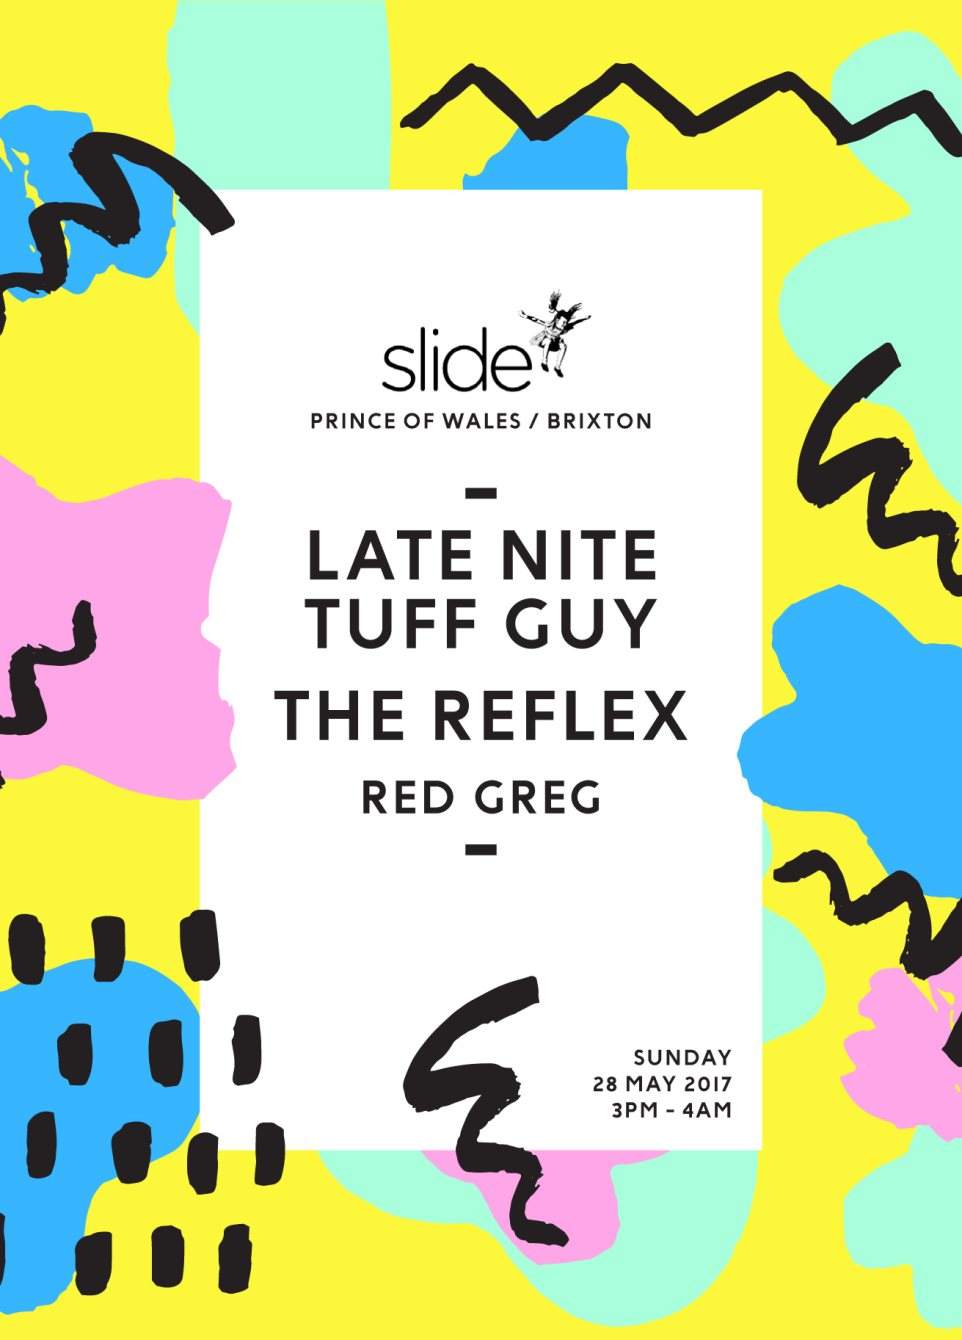 Slide with Late Nite Tuff Guy, The Reflex & Red Greg - Página frontal